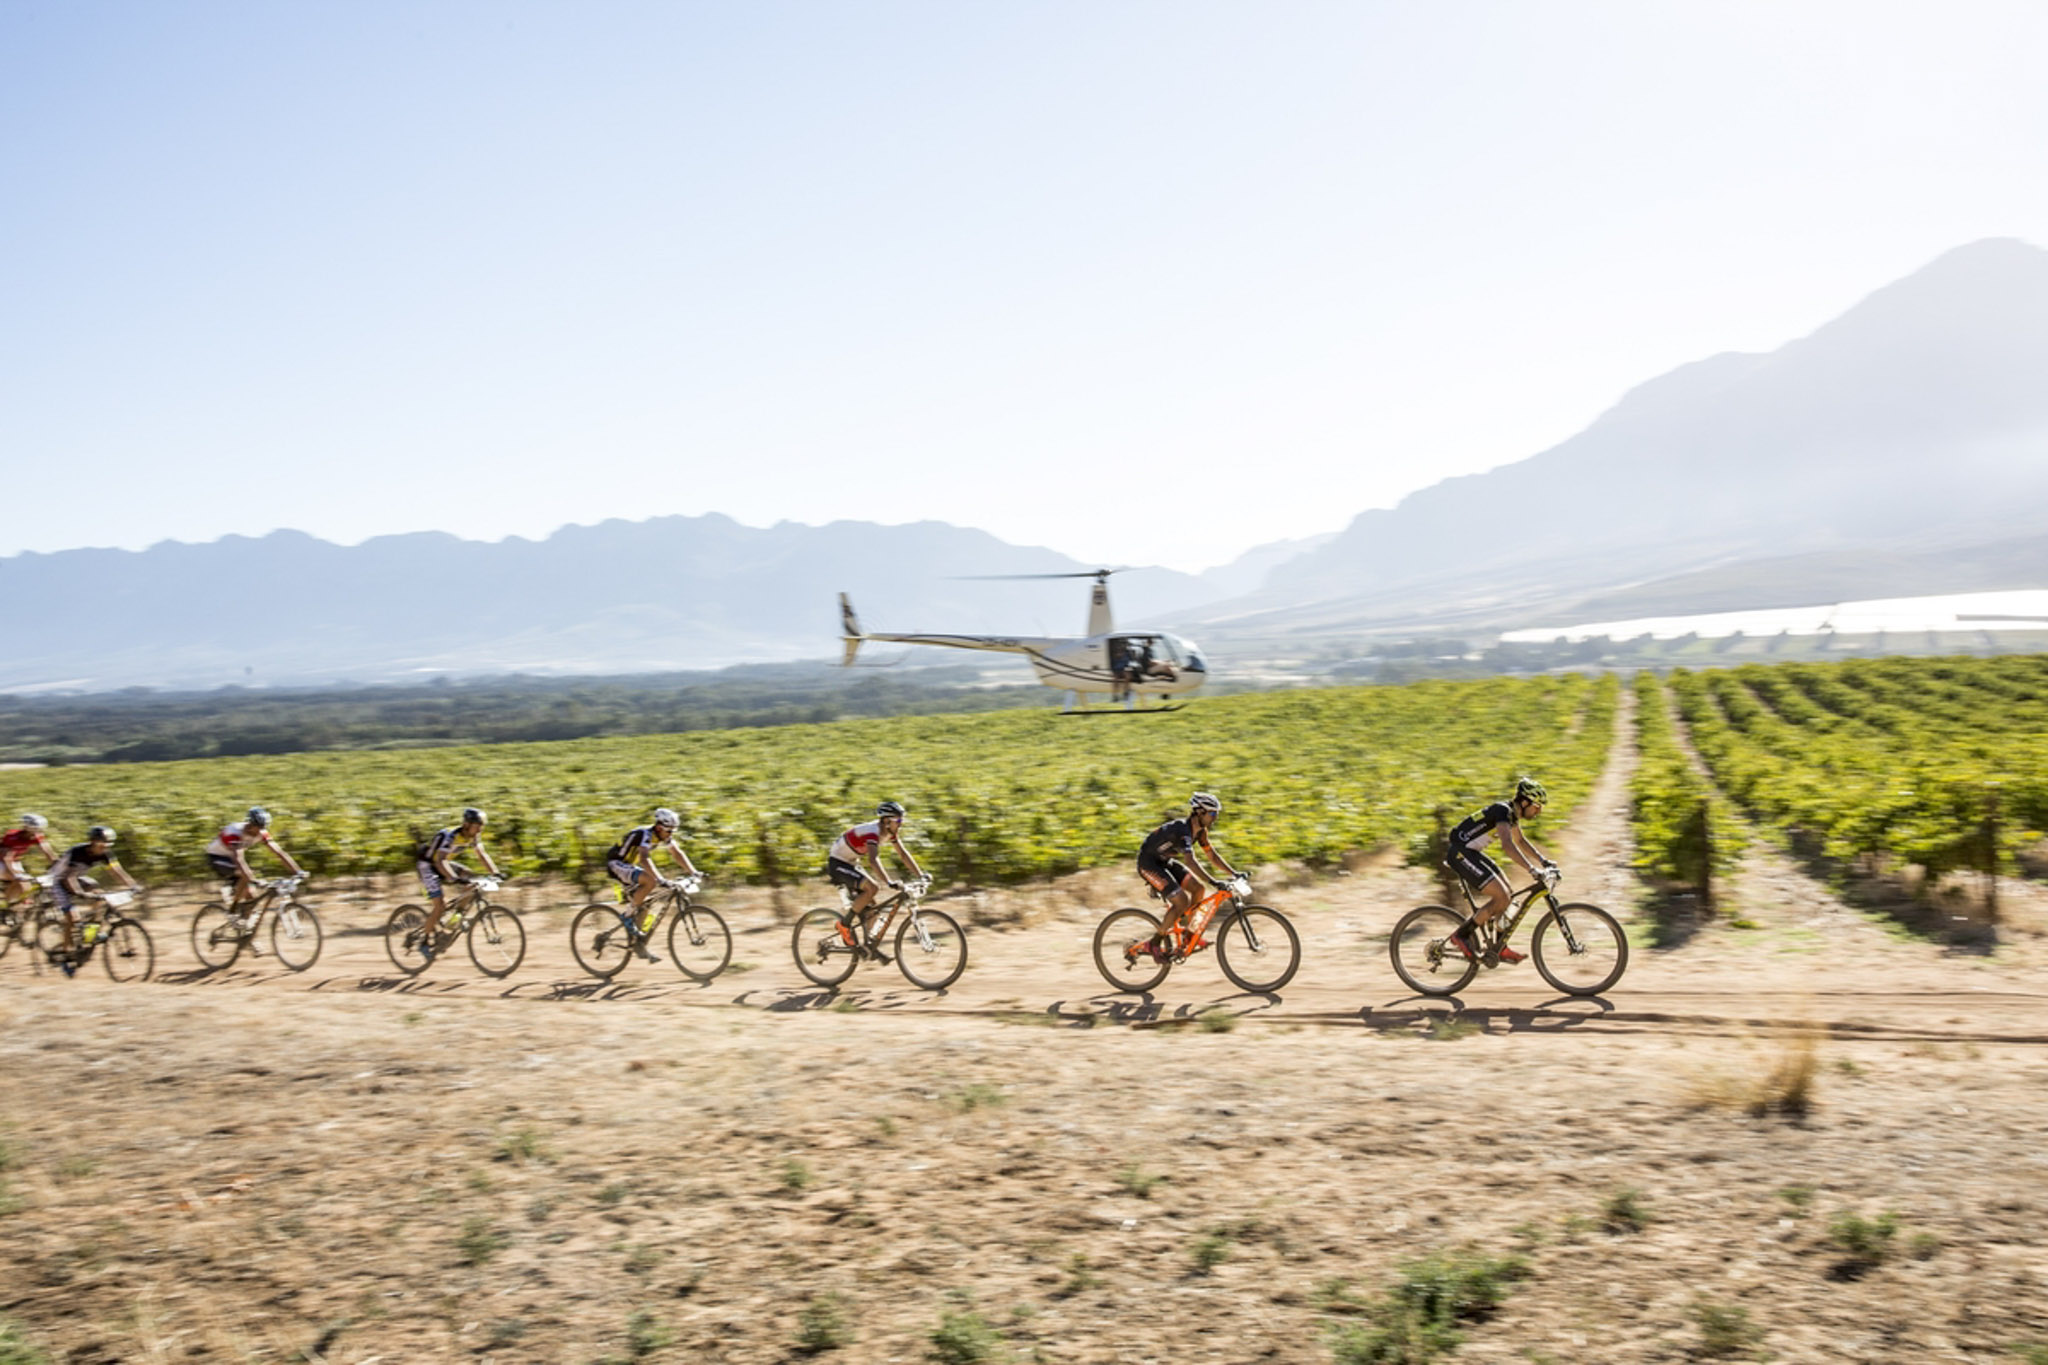 The leading bunch during stage 3 of the 2016 Absa Cape Epic Mountain Bike stage race held from Saronsberg Wine Estate in Tulbagh to the Cape Peninsula University of Technology in Wellington, South Africa on the 16th March 2016 Photo by Nick Muzik/Cape Epic/SPORTZPICS PLEASE ENSURE THE APPROPRIATE CREDIT IS GIVEN TO THE PHOTOGRAPHER AND SPORTZPICS ALONG WITH THE ABSA CAPE EPIC ace2016